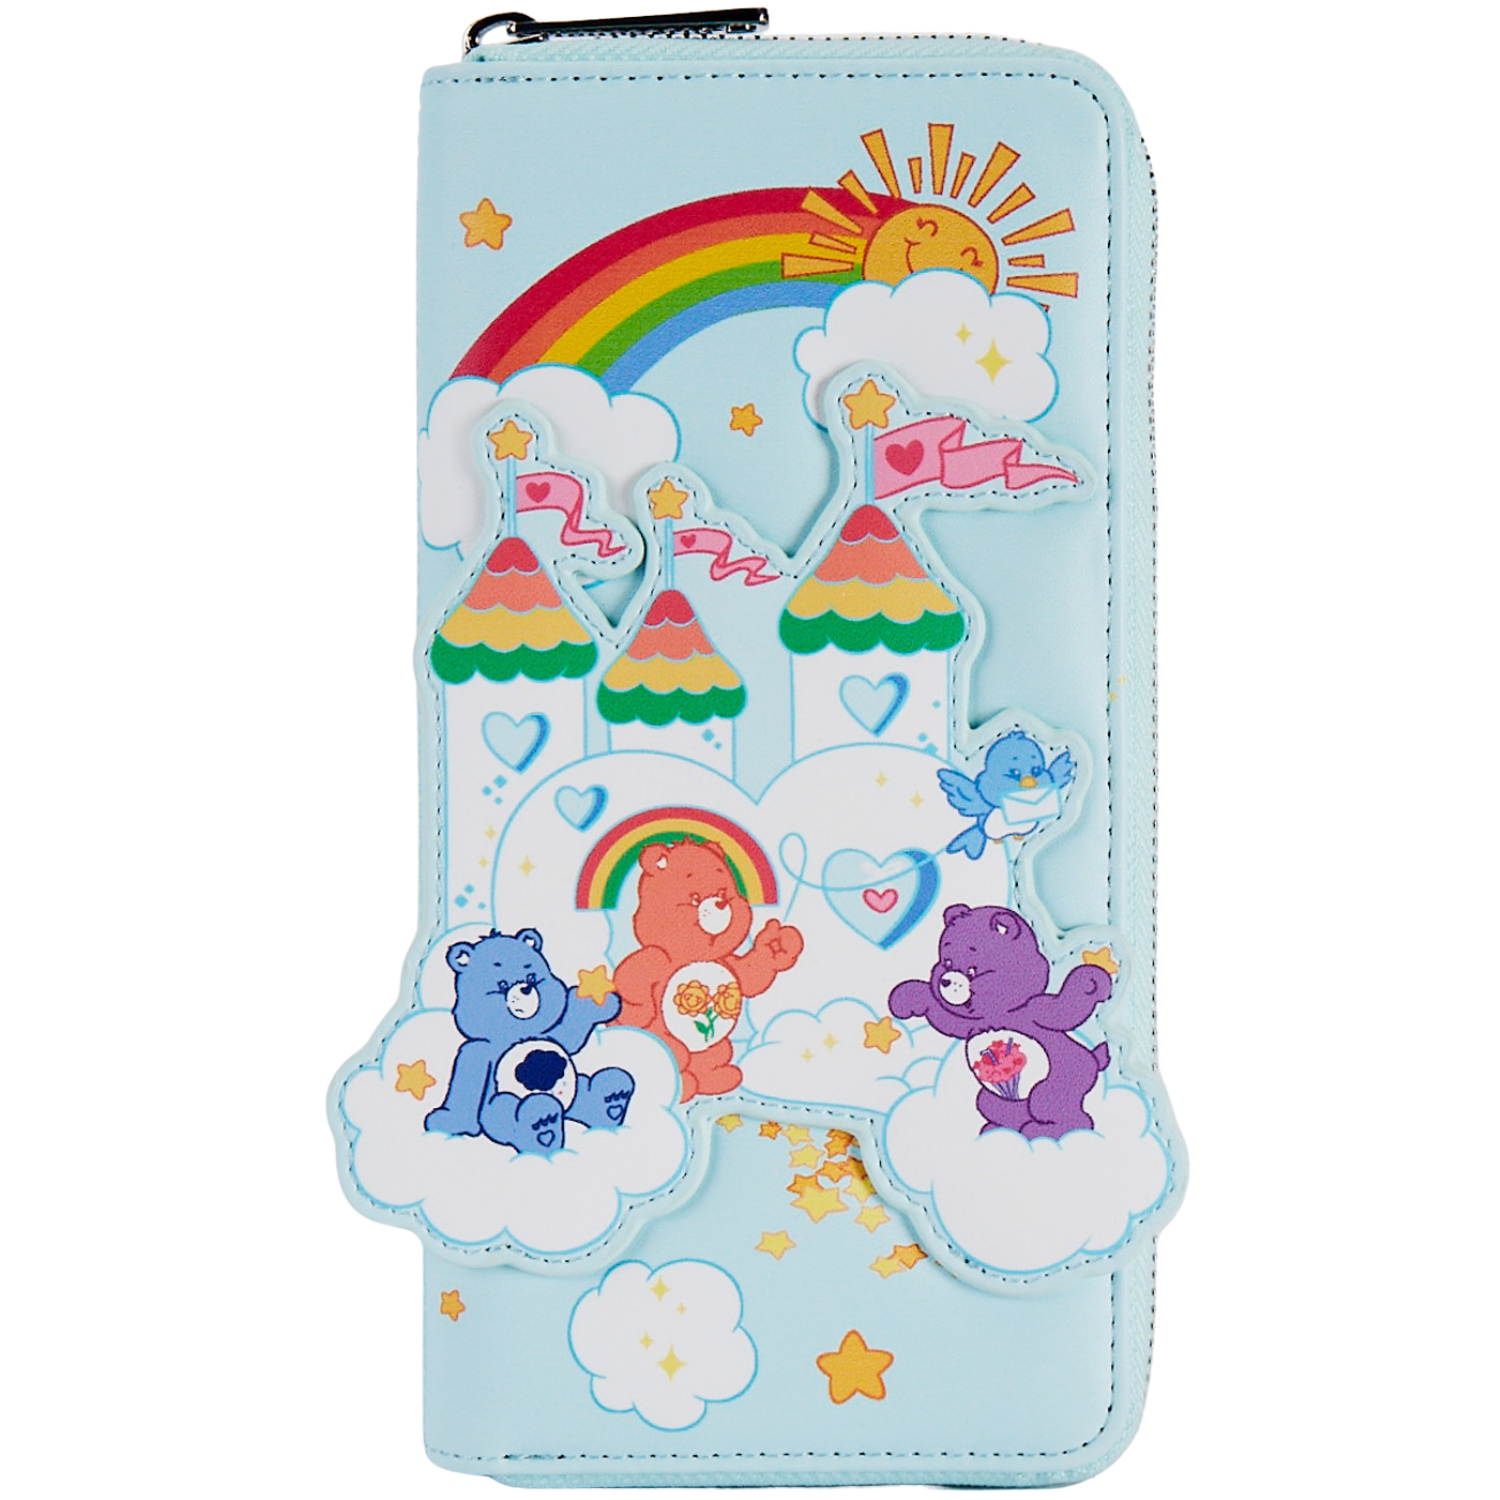 Loungefly Care Bears Care-A-Lot Castle Ziparound Wallet